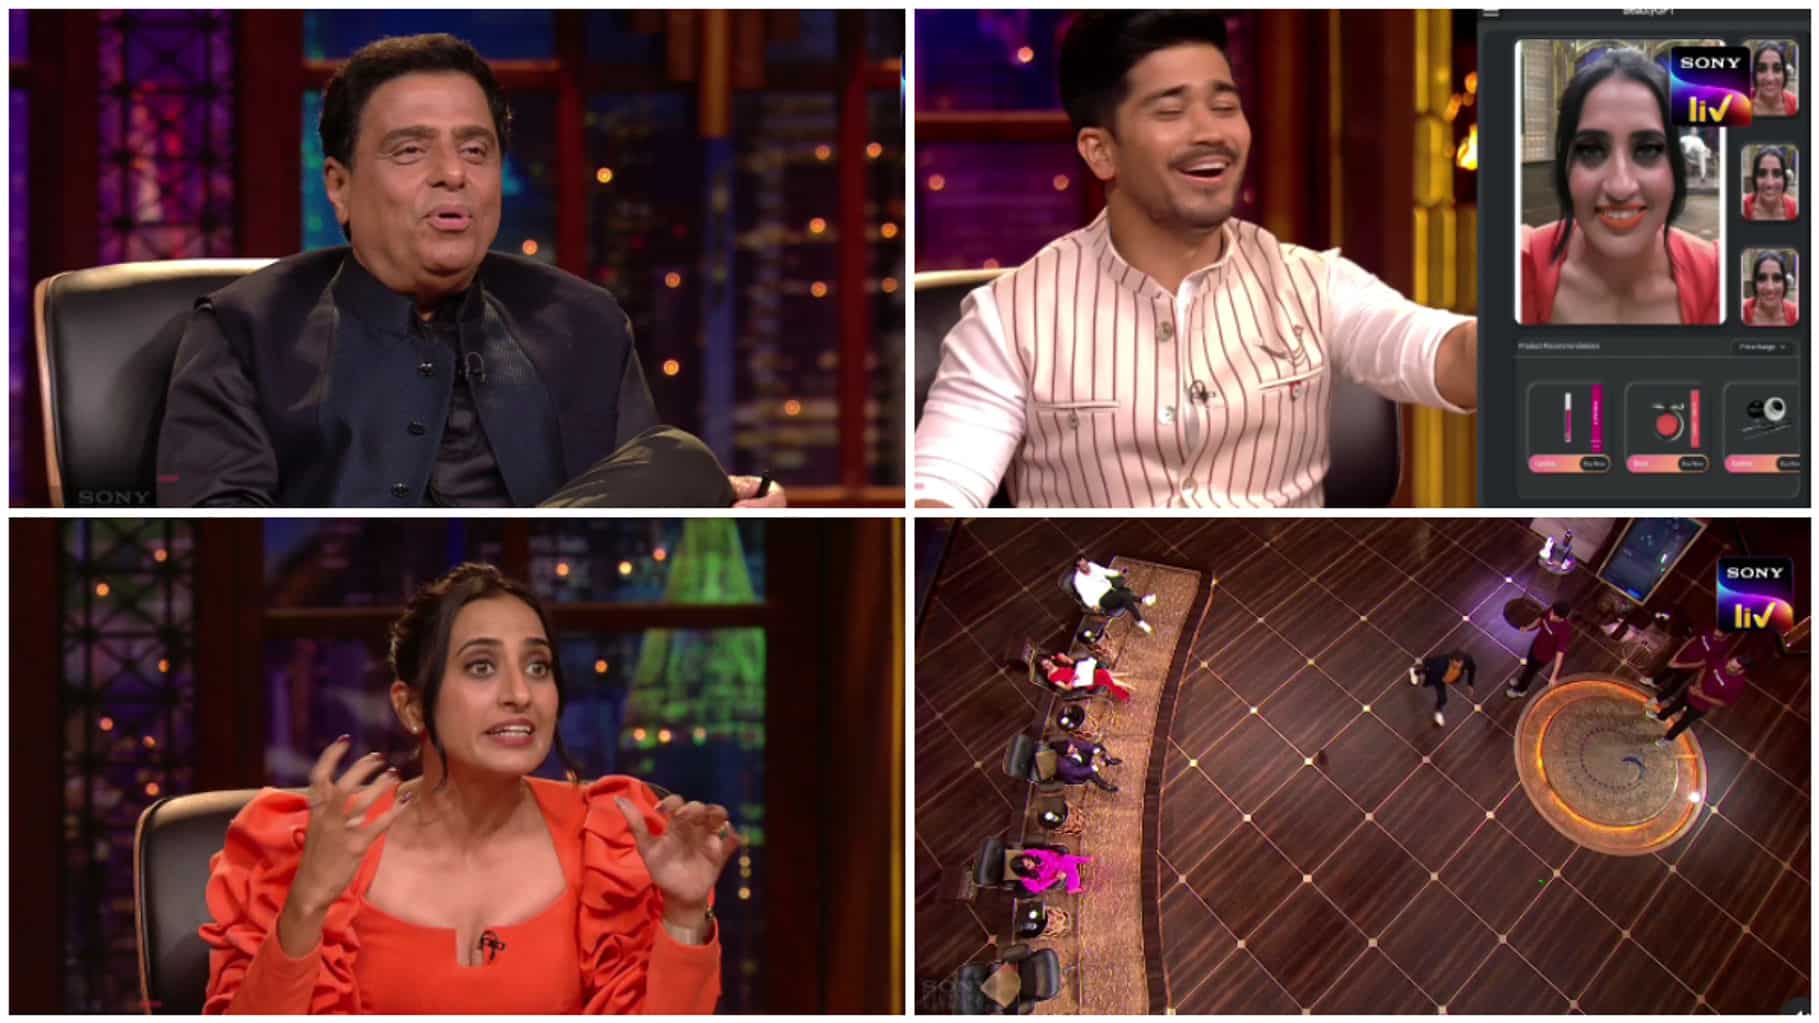 https://www.mobilemasala.com/film-gossip/Shark-Tank-India-3-Upcoming-episodes-to-feature-Ronnie-Screwvala-Vineetas-imaginary-bridal-look-and-more-i213883